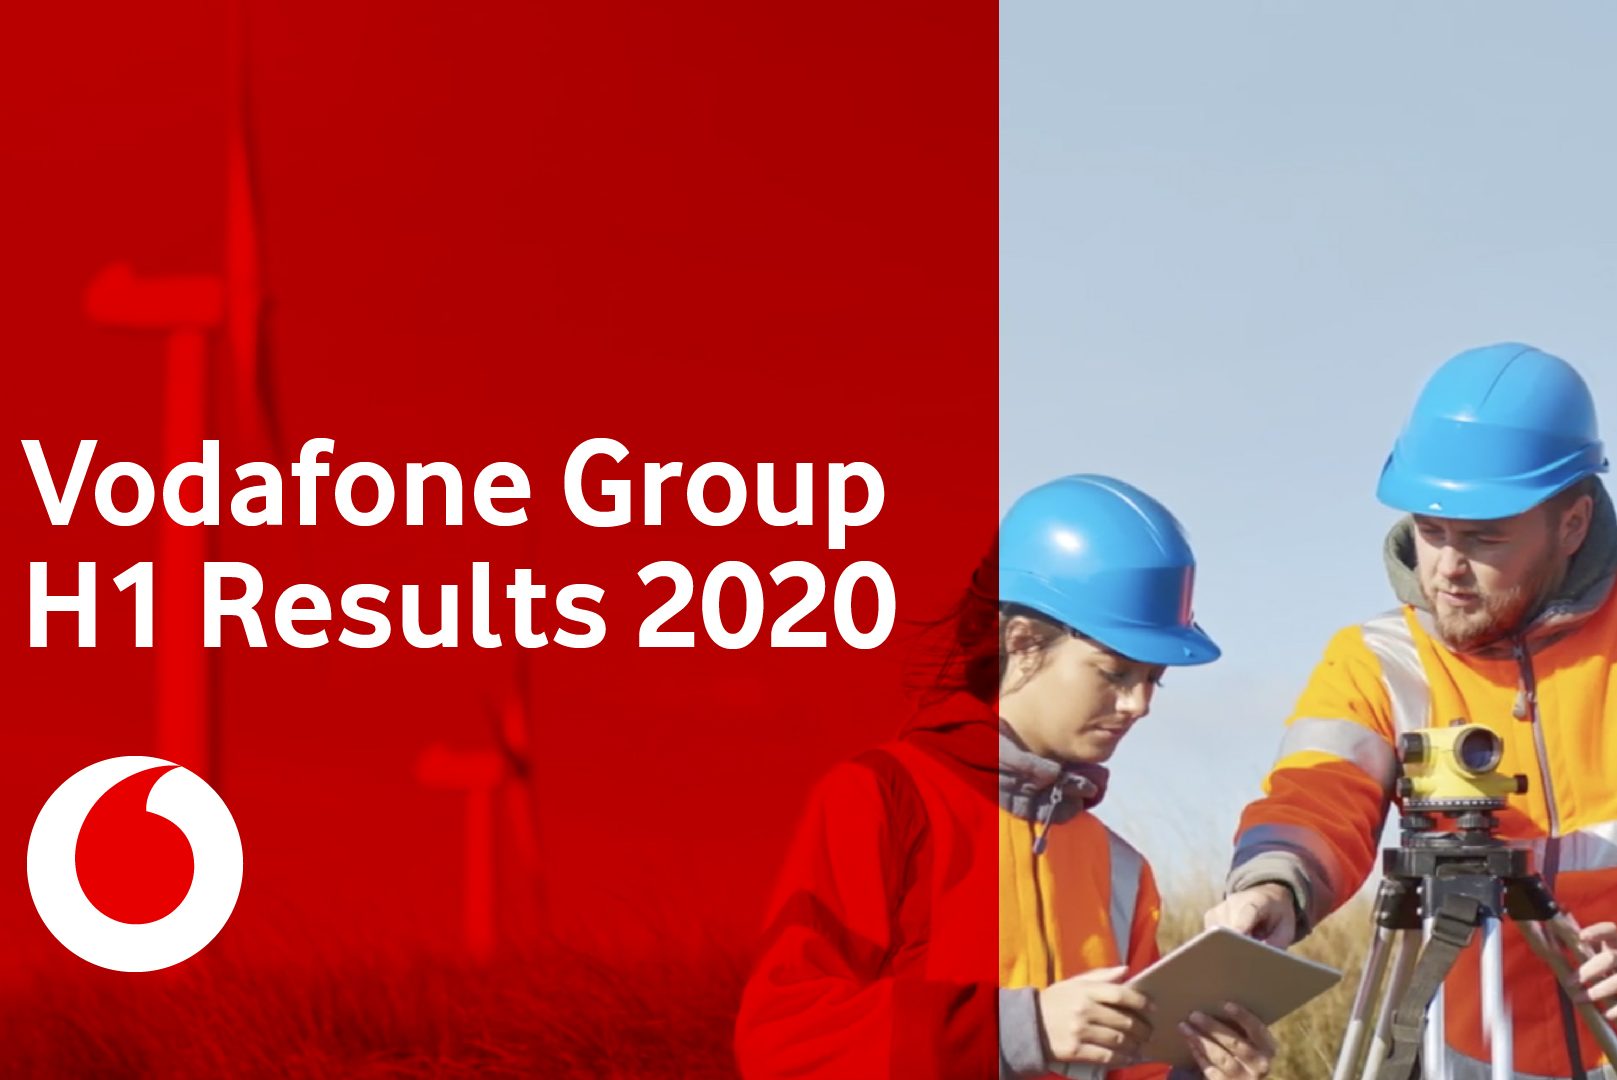 Vodafone Group H1 Results 2020